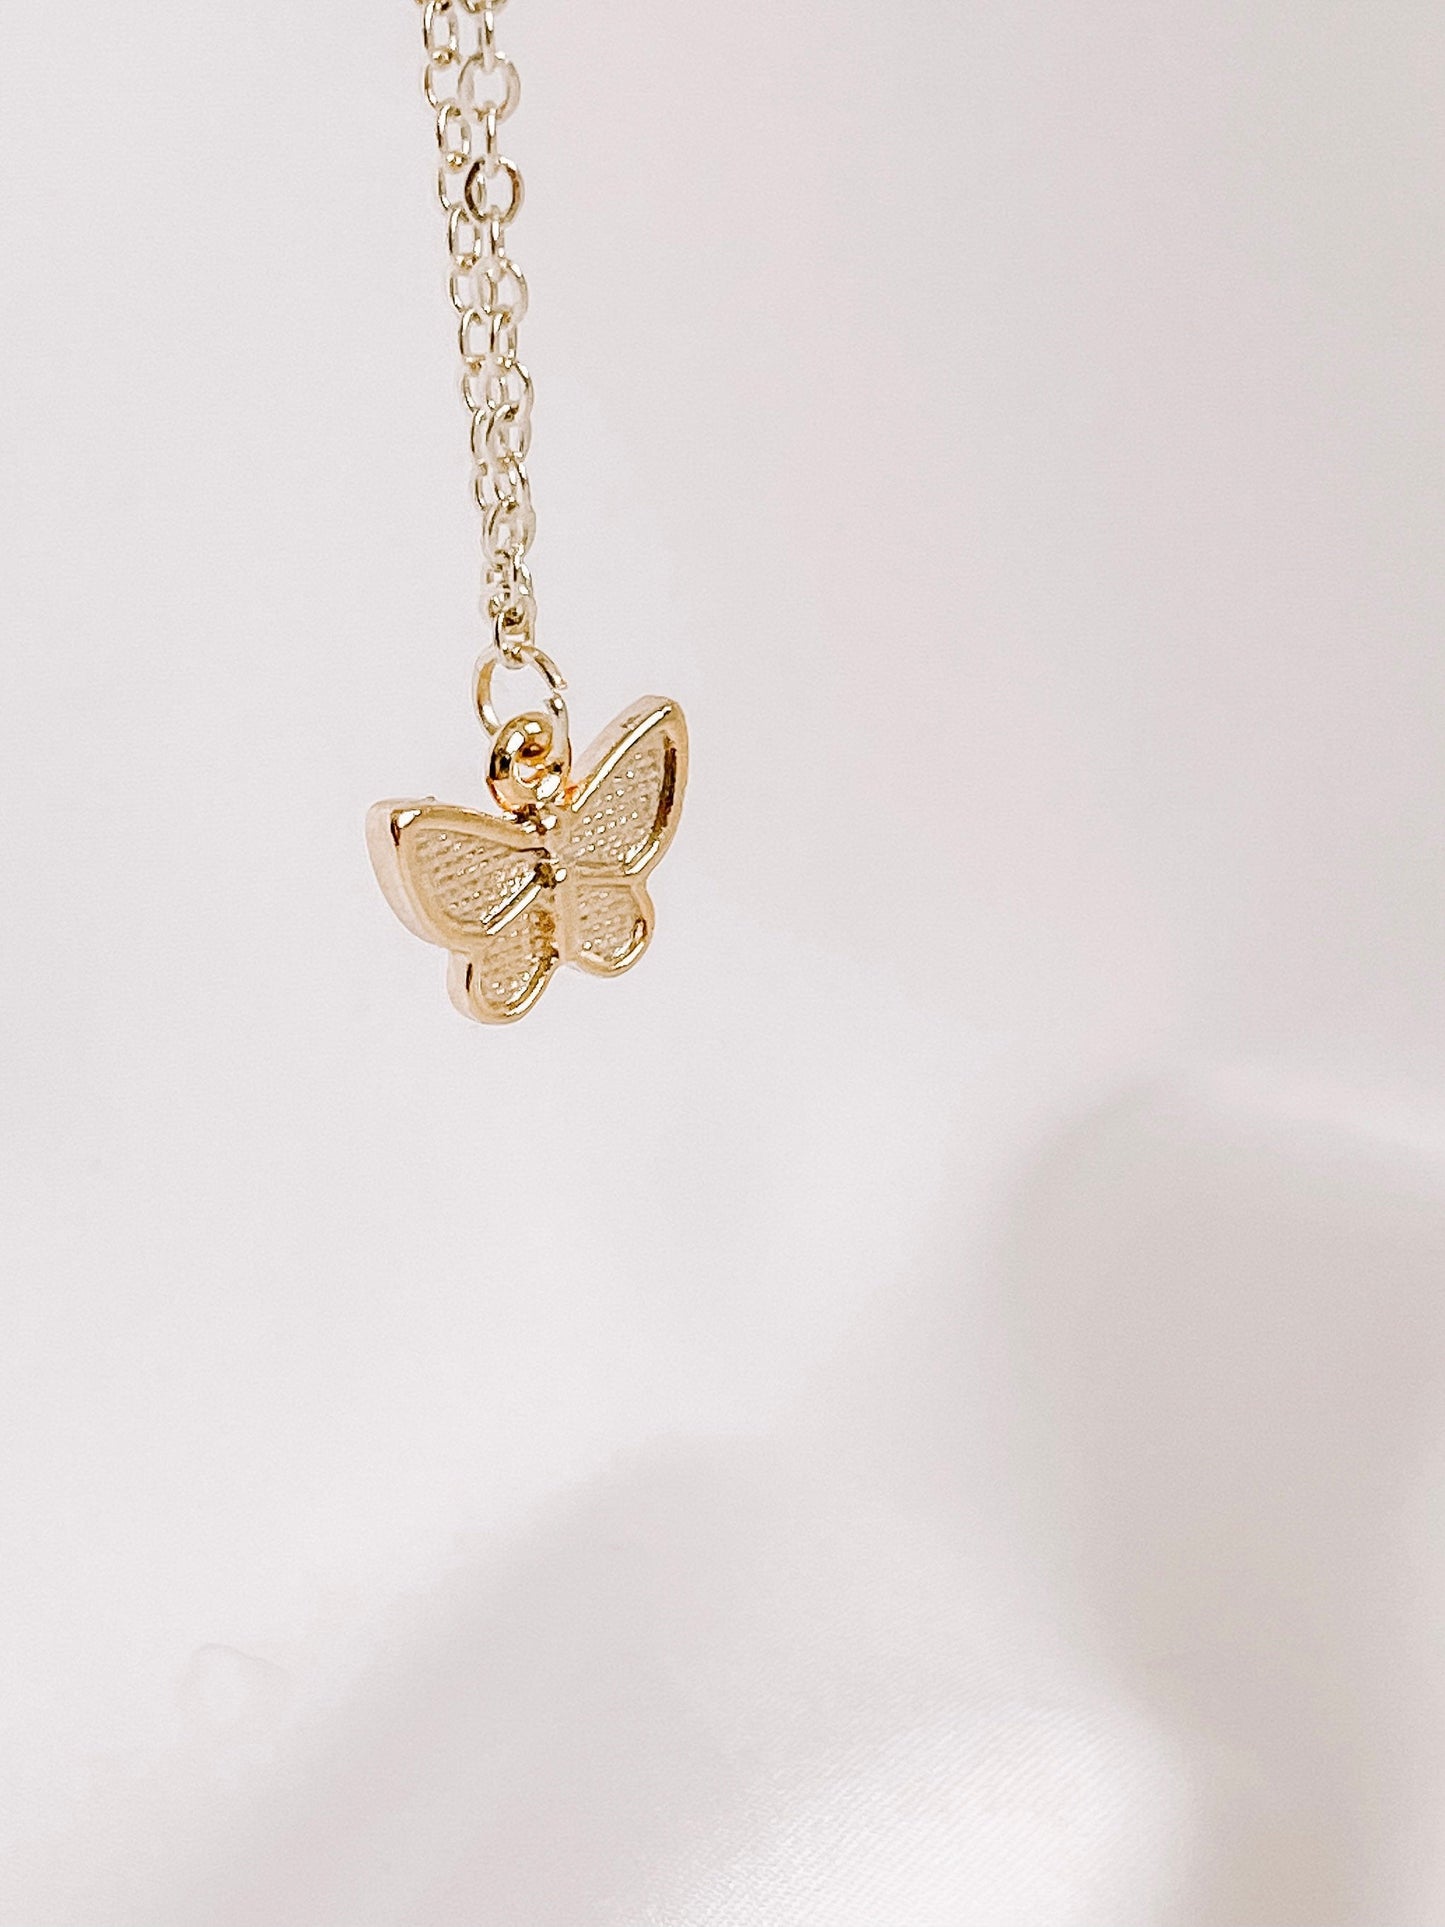 24k gold butterfly charm necklace